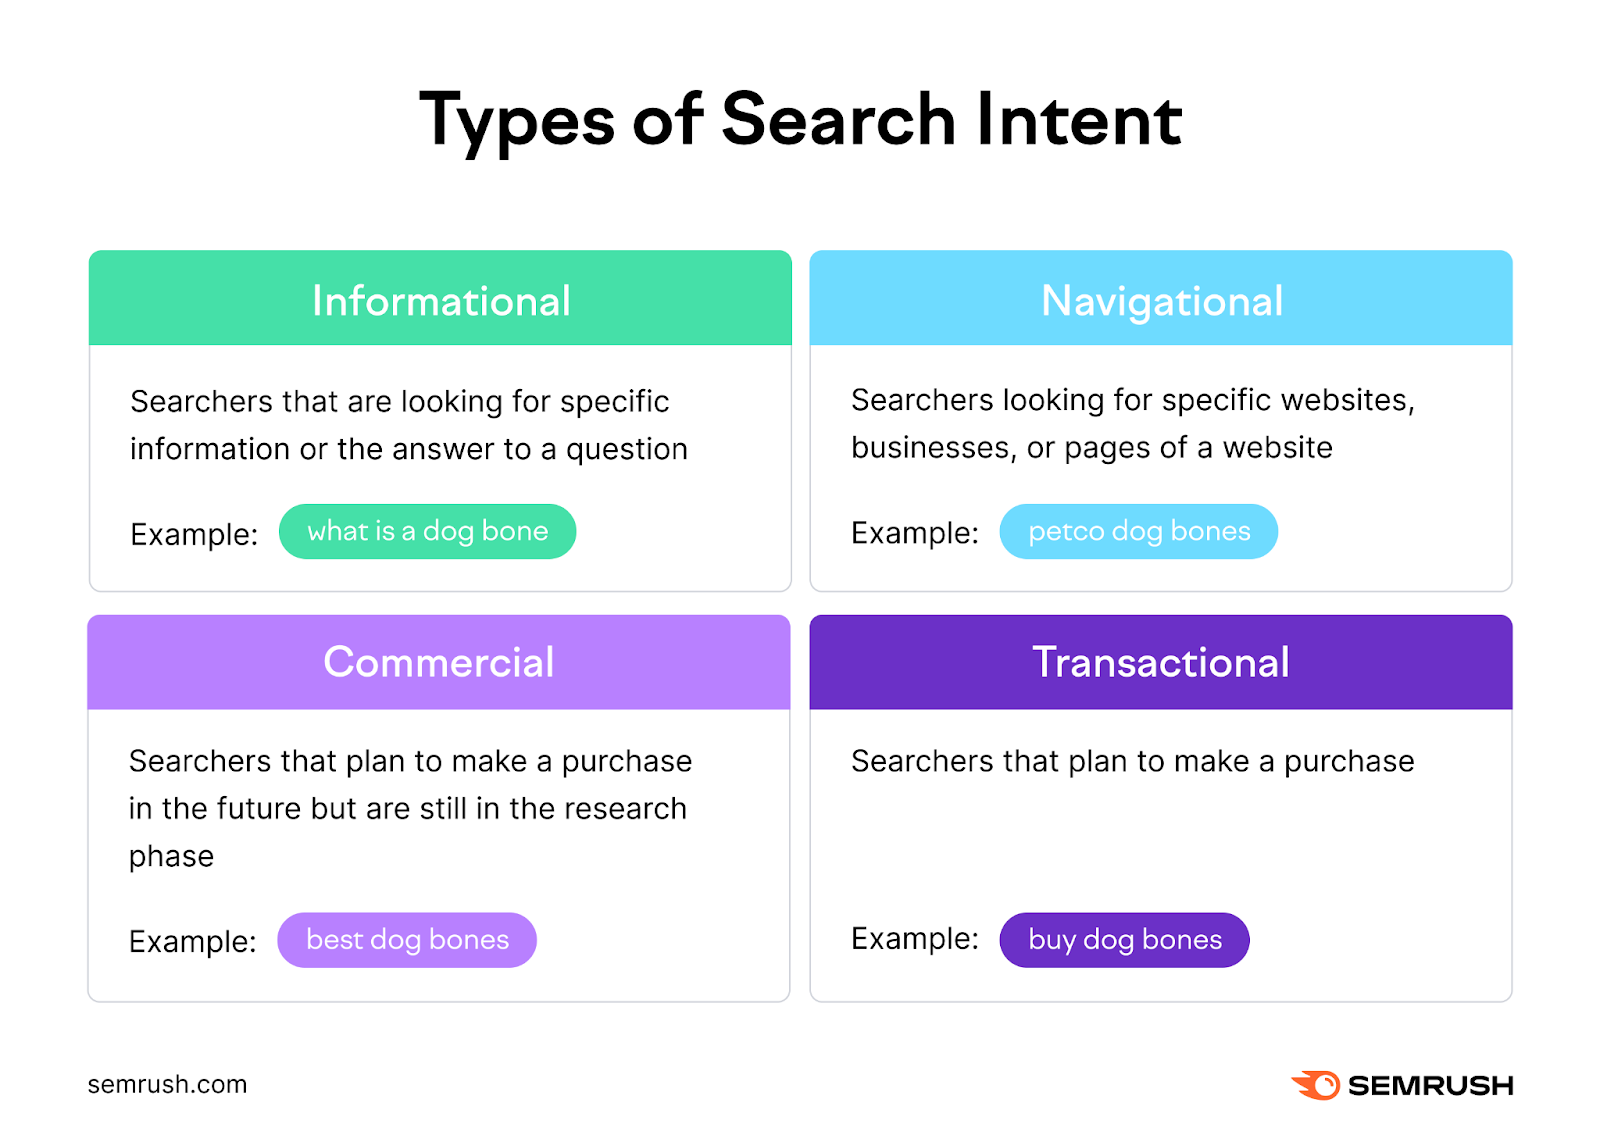 types of search intent example shows what is a dog bone is informational, petco dog bones is navigational, best dog bones is commercial, and buy dog bones is transactional